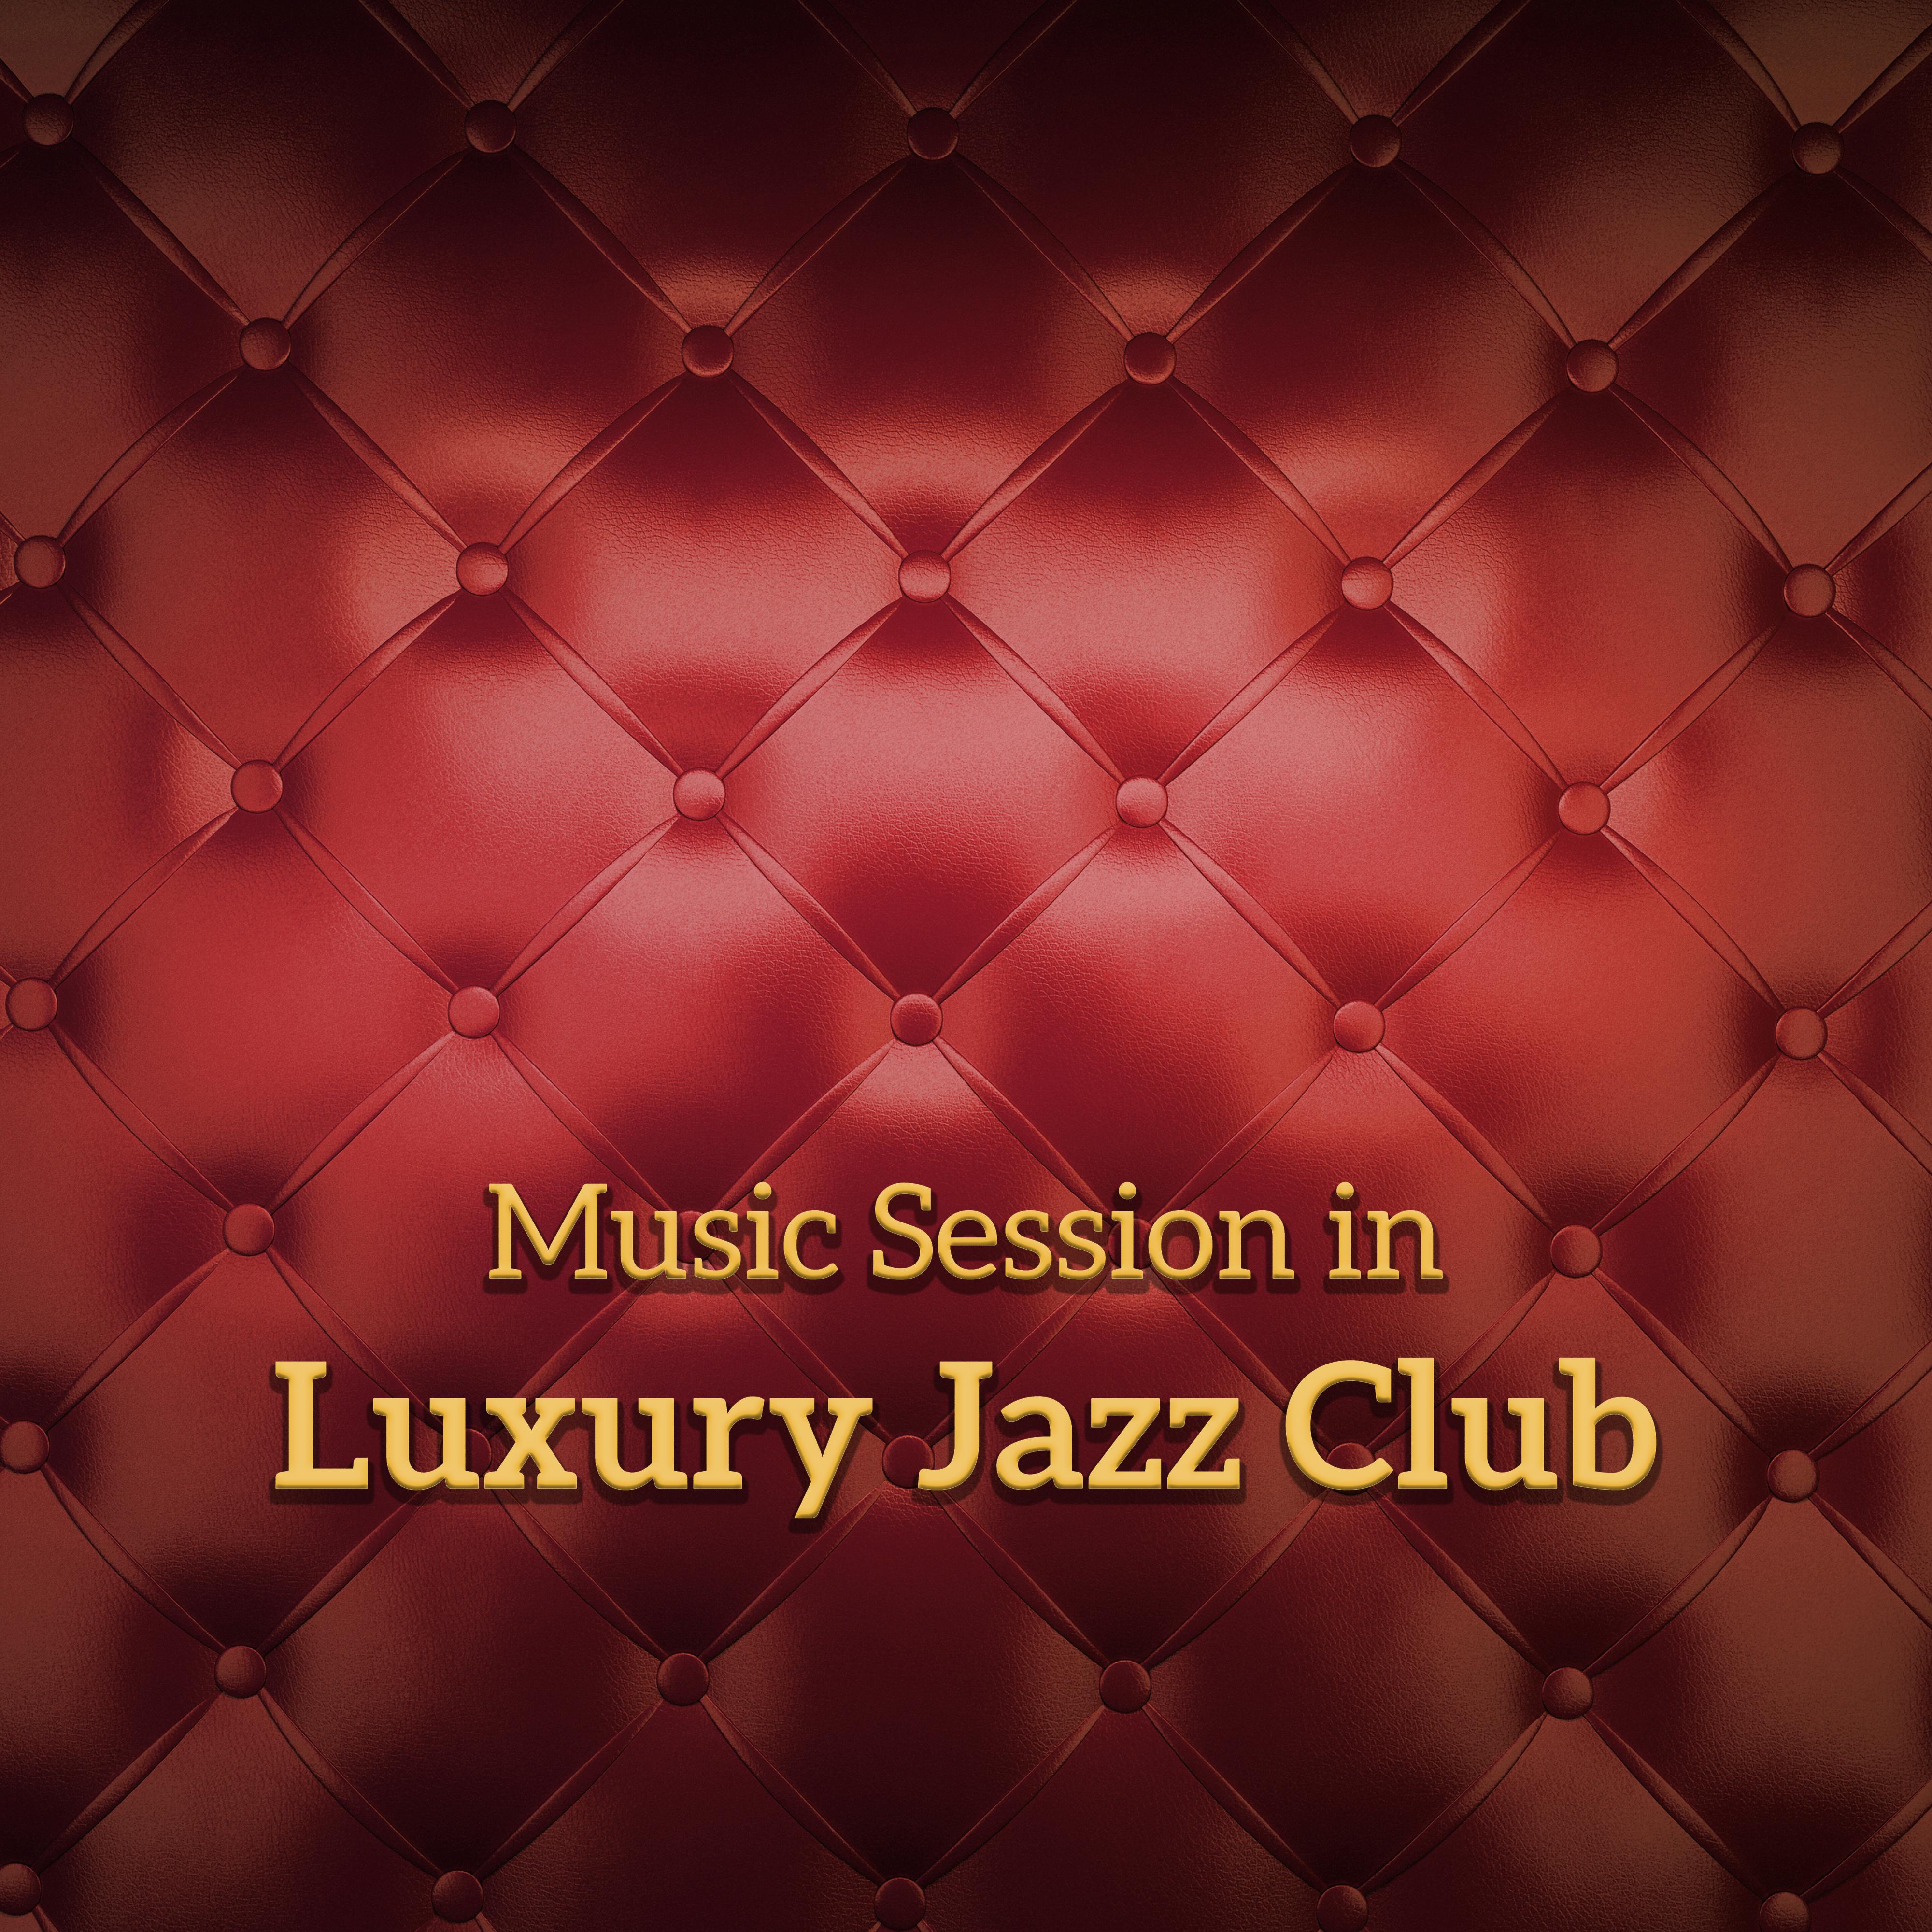 Music Session in Luxury Jazz Club